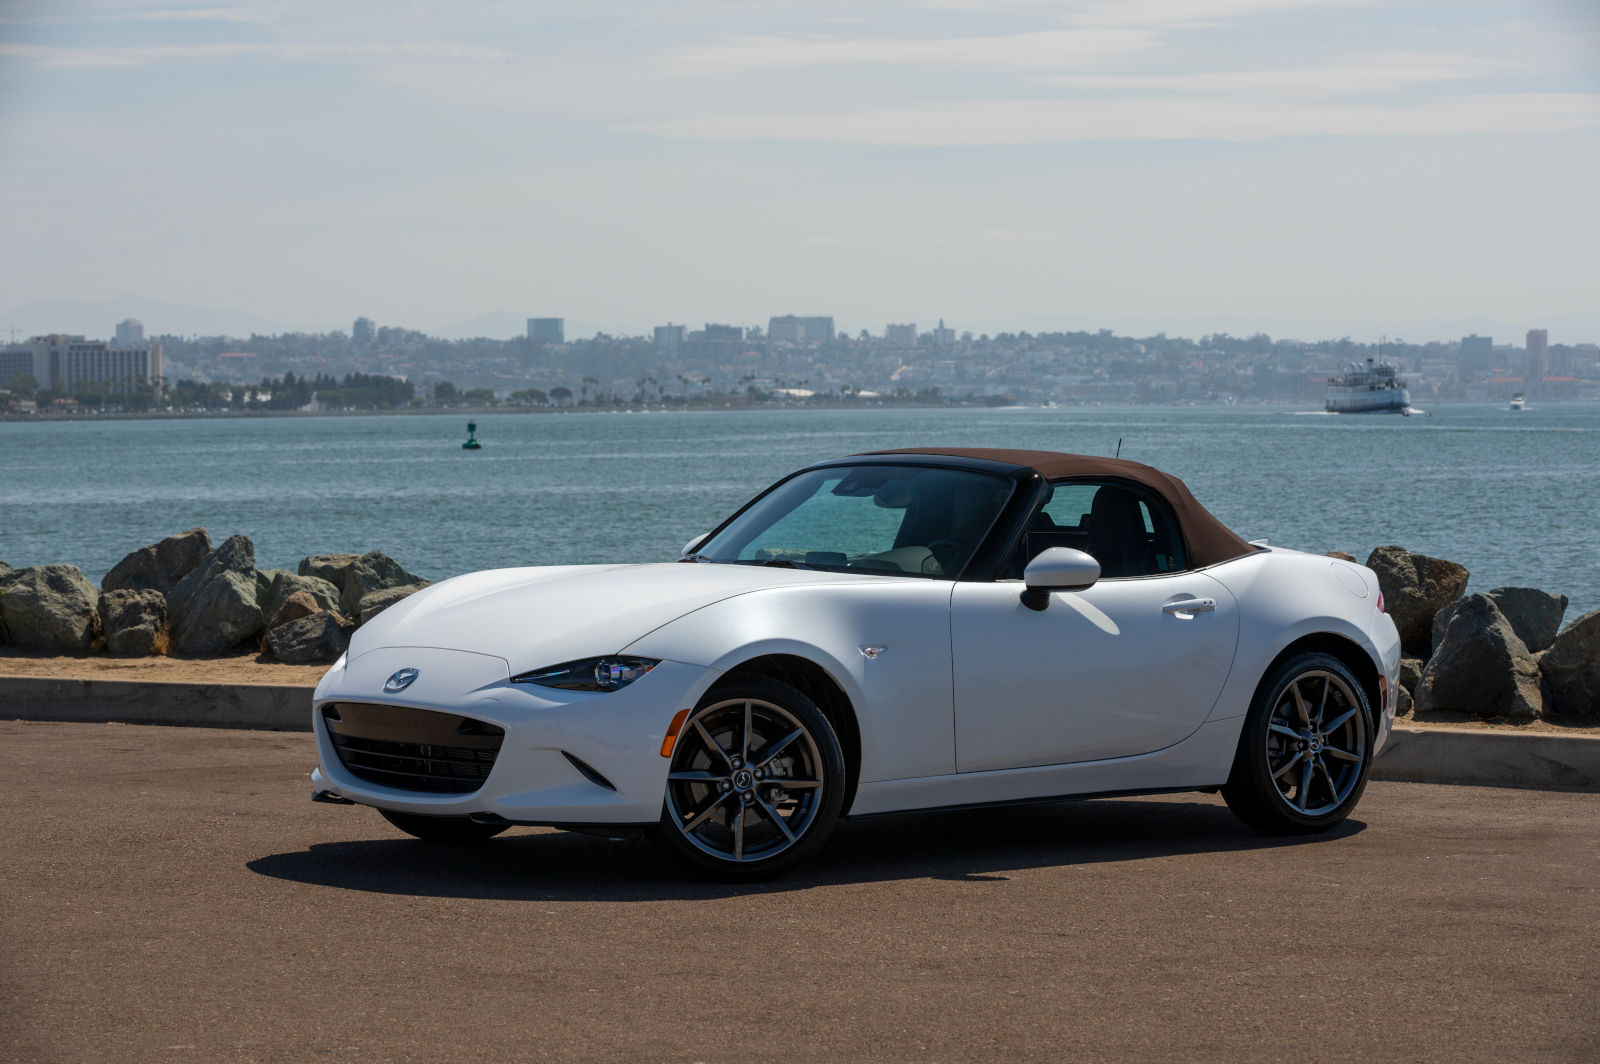 Some Tips to Make Sure Your Mazda is Ready for Summer